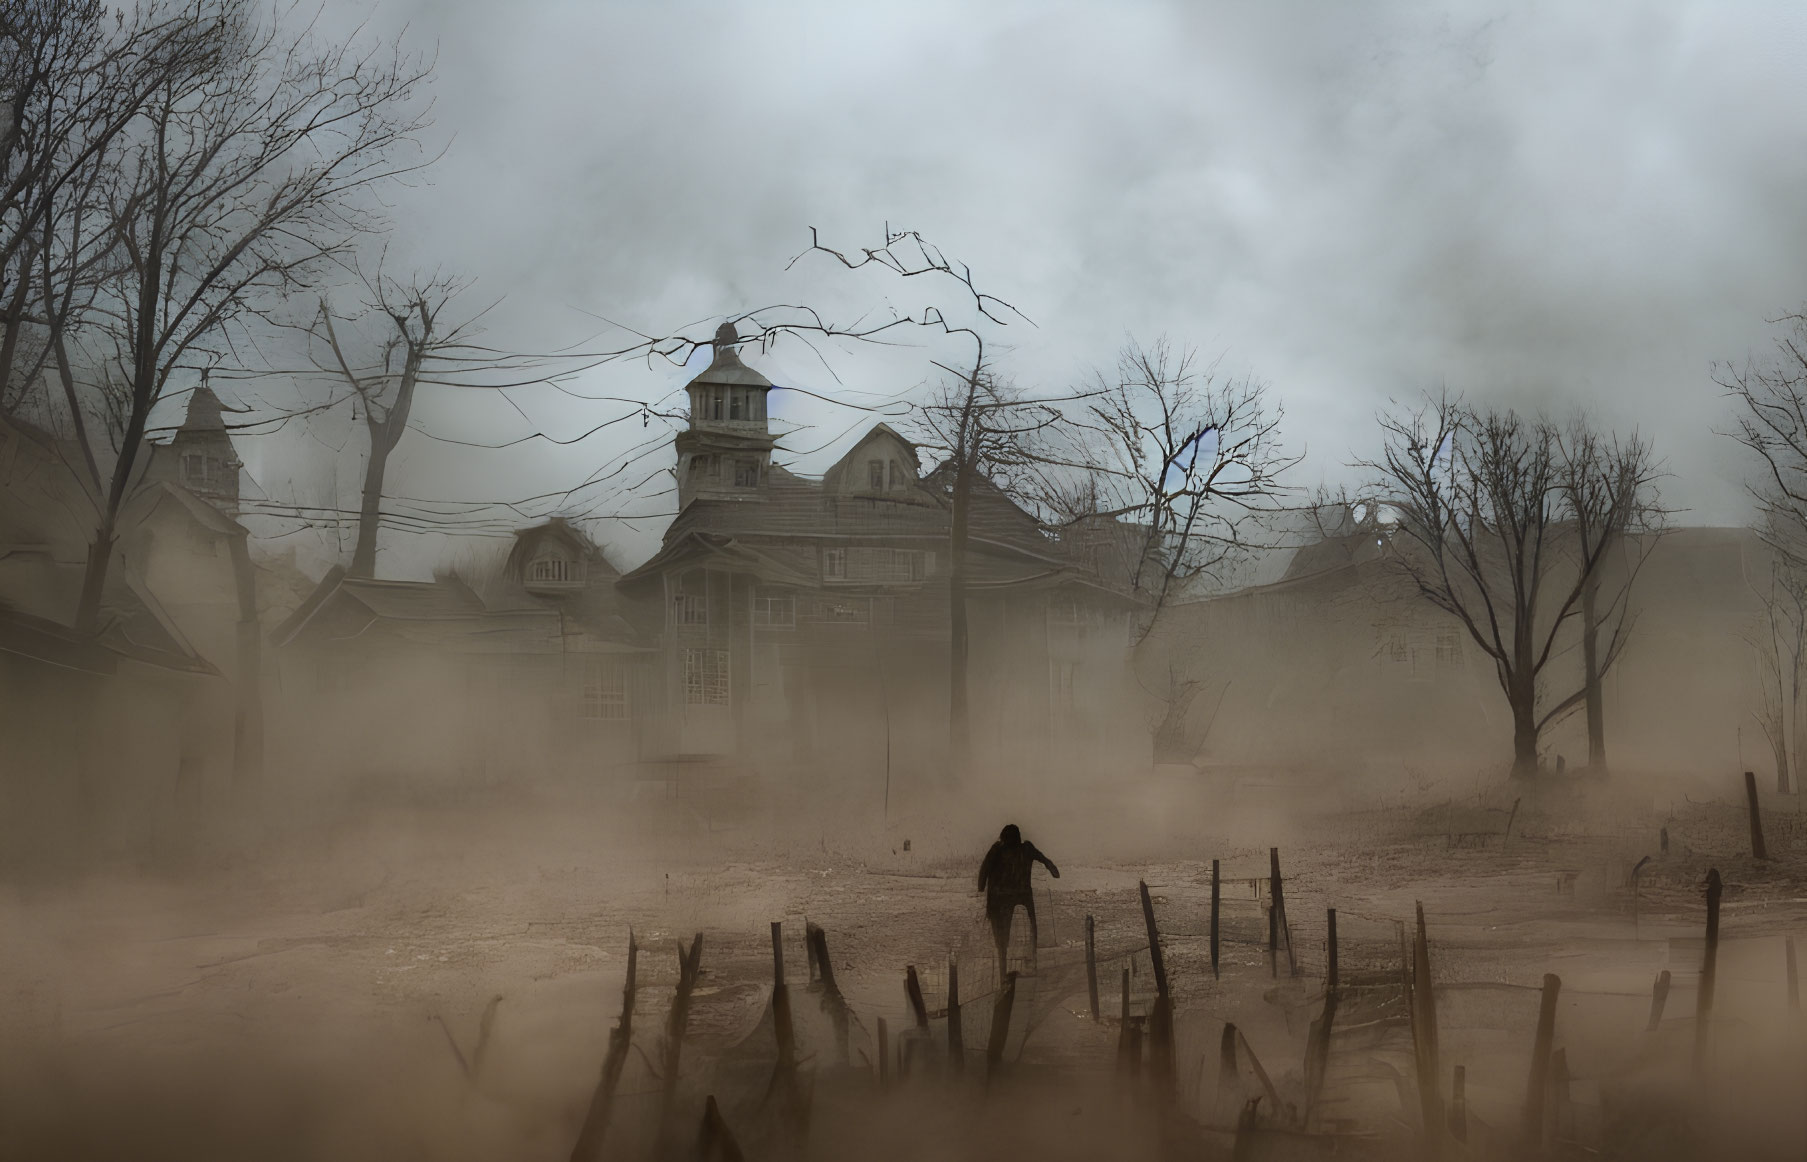 Desolate village with misty atmosphere and lone figure